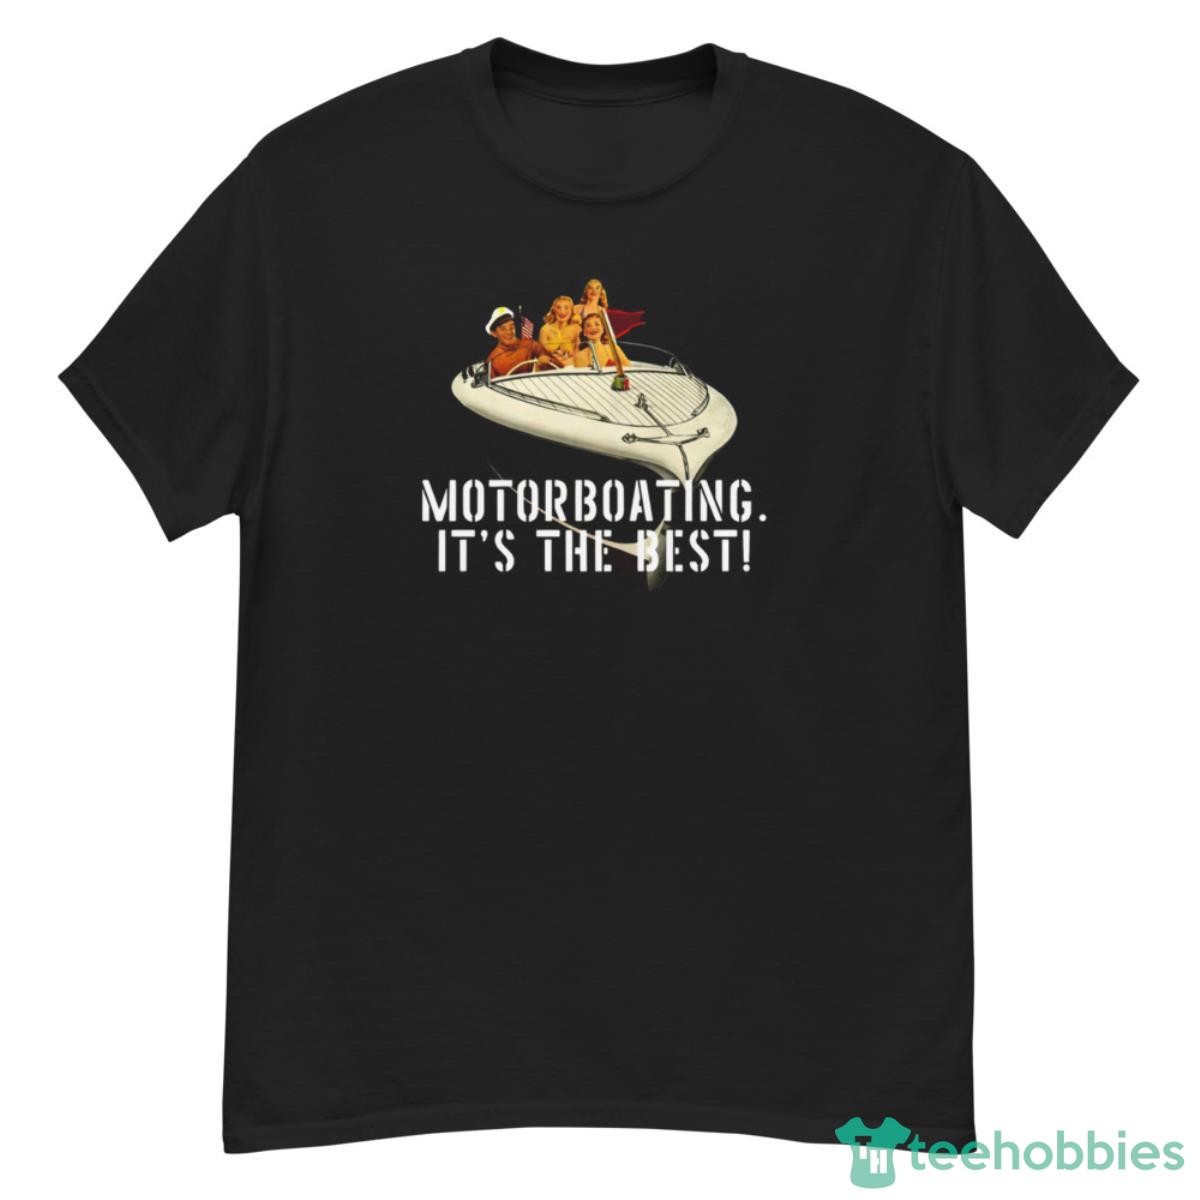 Motorboating It’s The Best Shirt - G500 Men’s Classic T-Shirt